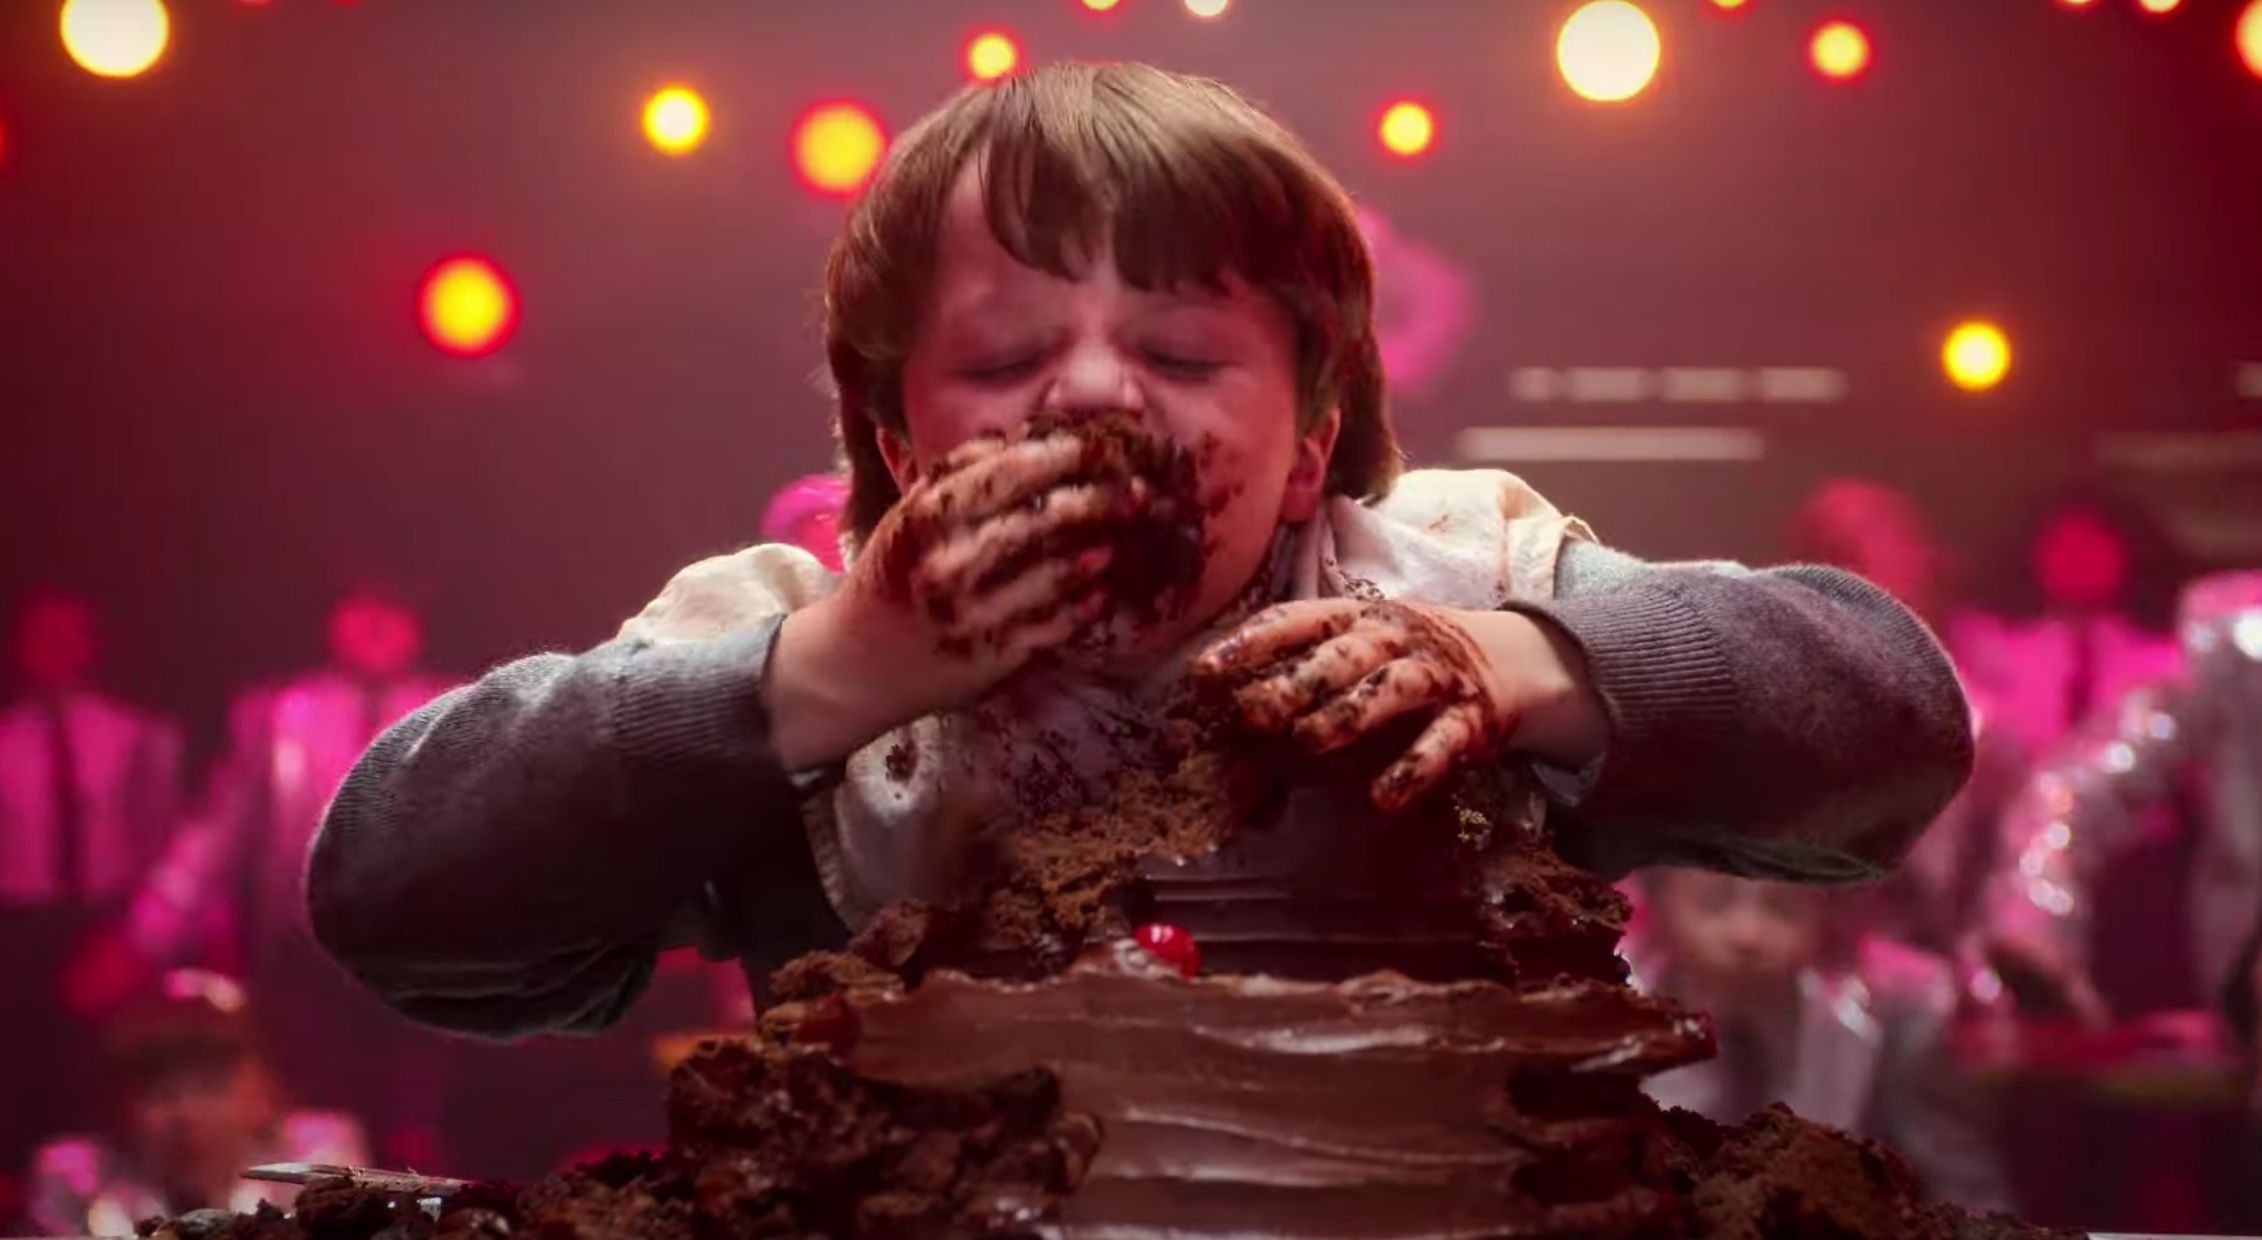 Bruce Bogtrotter's cake-eating scene has made it into the new movie